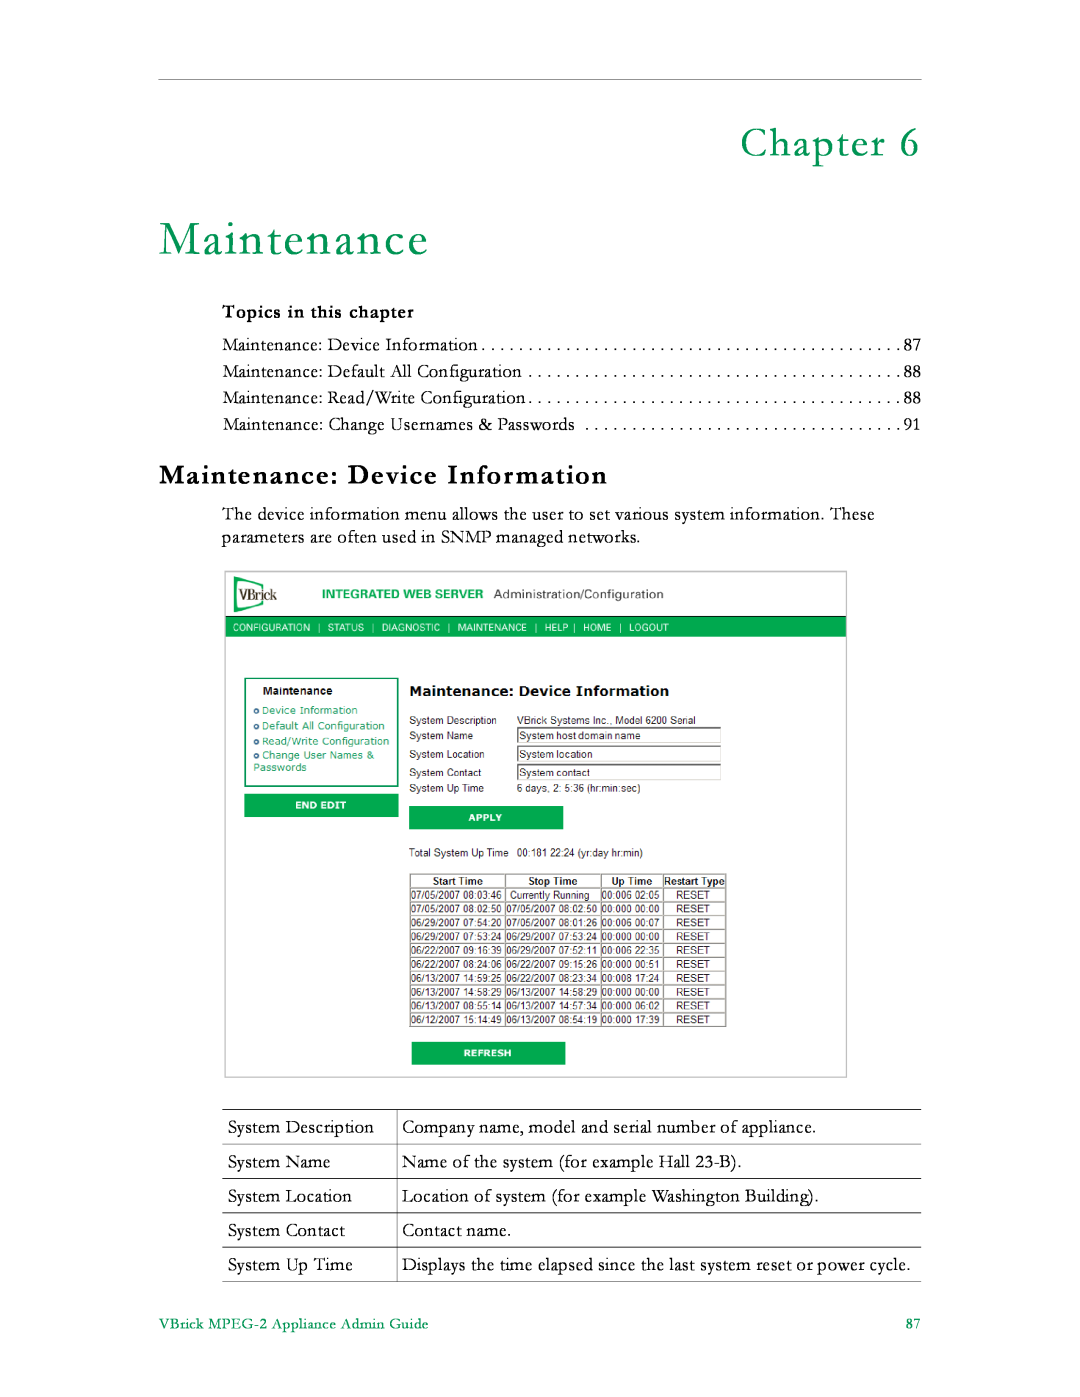 VBrick Systems VB5000, VB6000, VB4000 manual Maintenance Device Information, Chapter, Topics in this chapter 